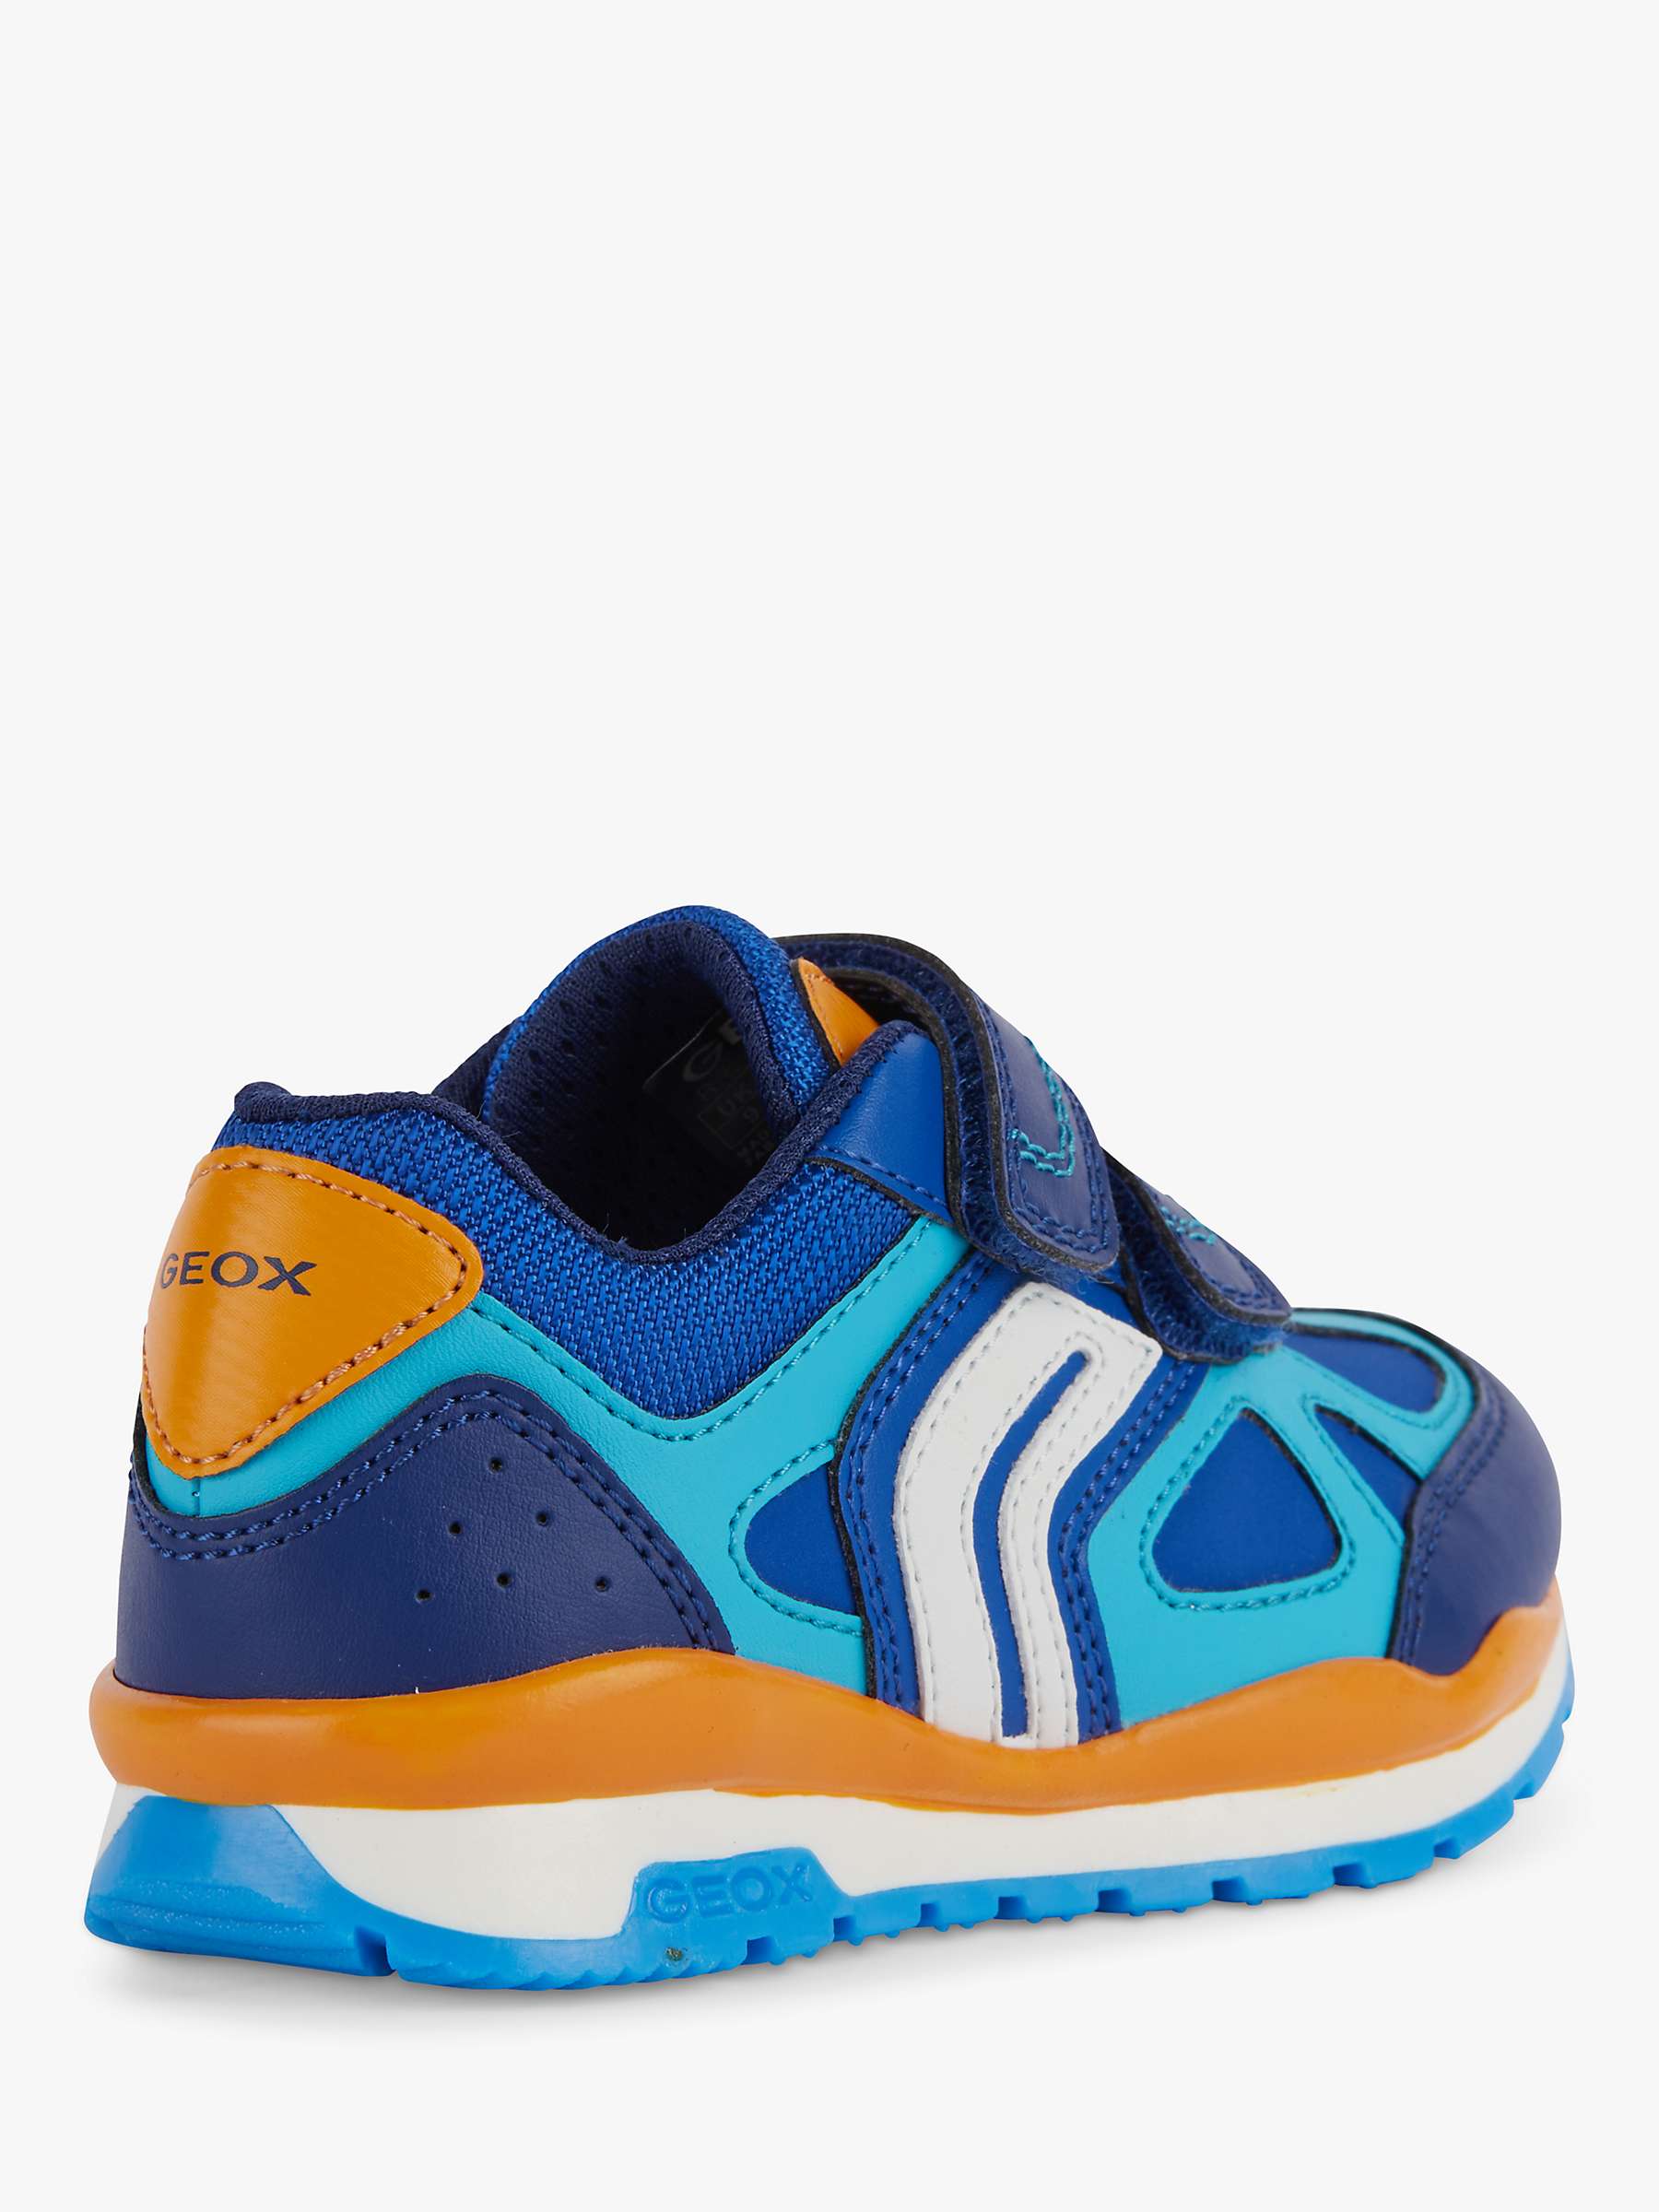 Buy Geox Kids' Pavel D Low-Cut Trainers Online at johnlewis.com